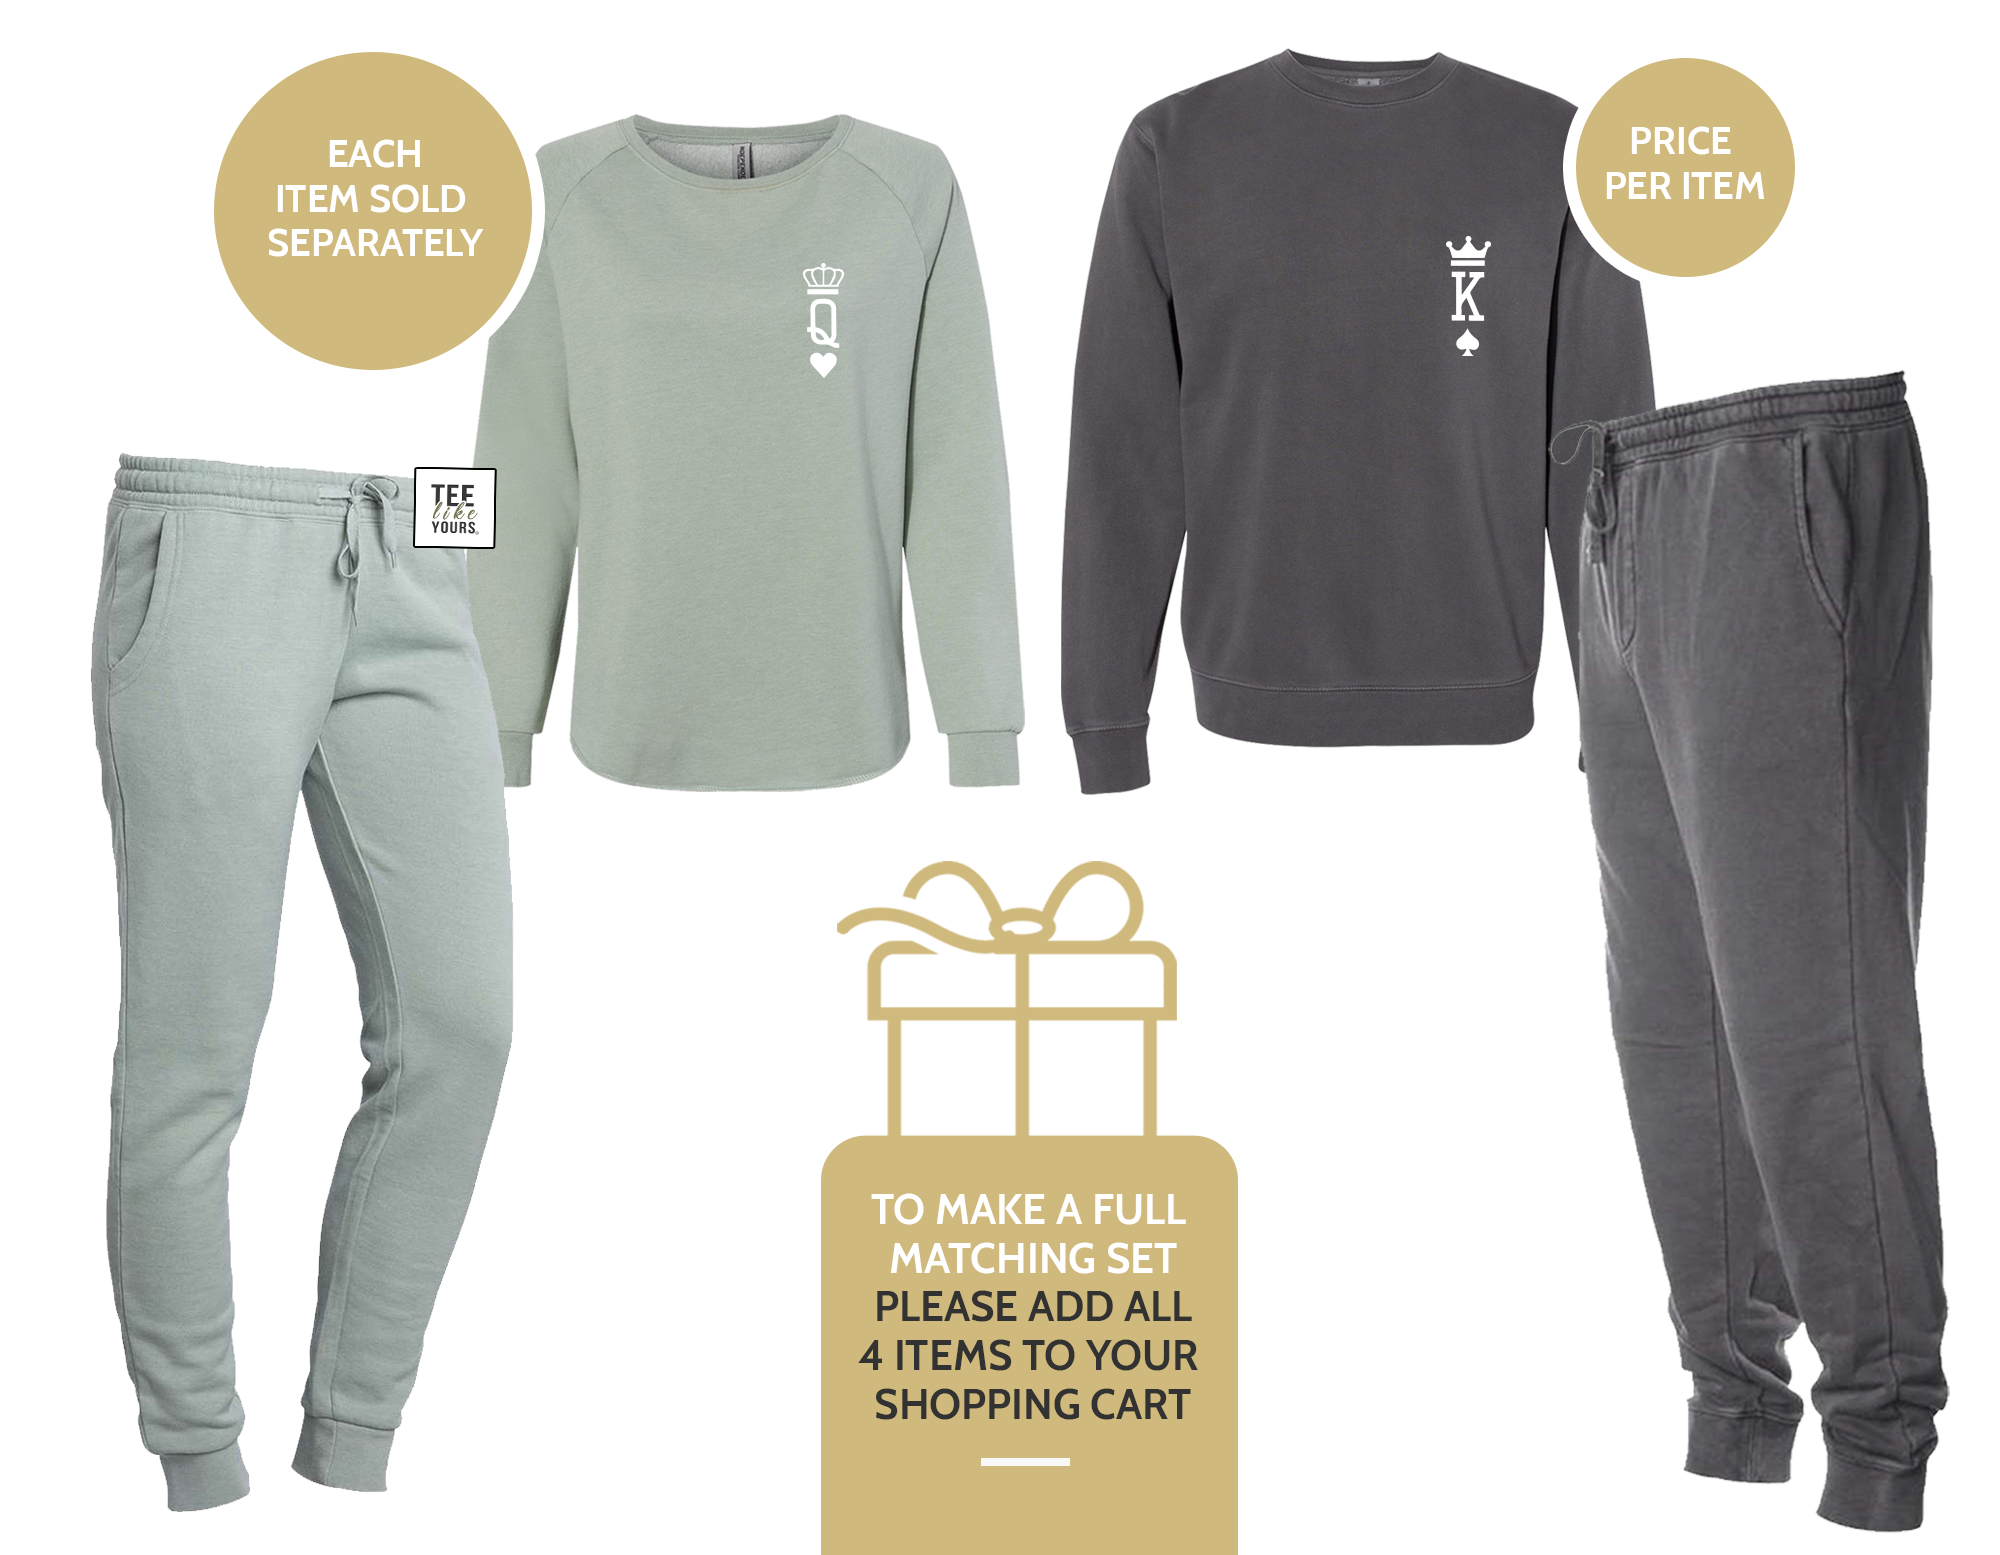 King & Queen Couple Matching Set - Sweatshirt and Sweatpants couple outfit  –